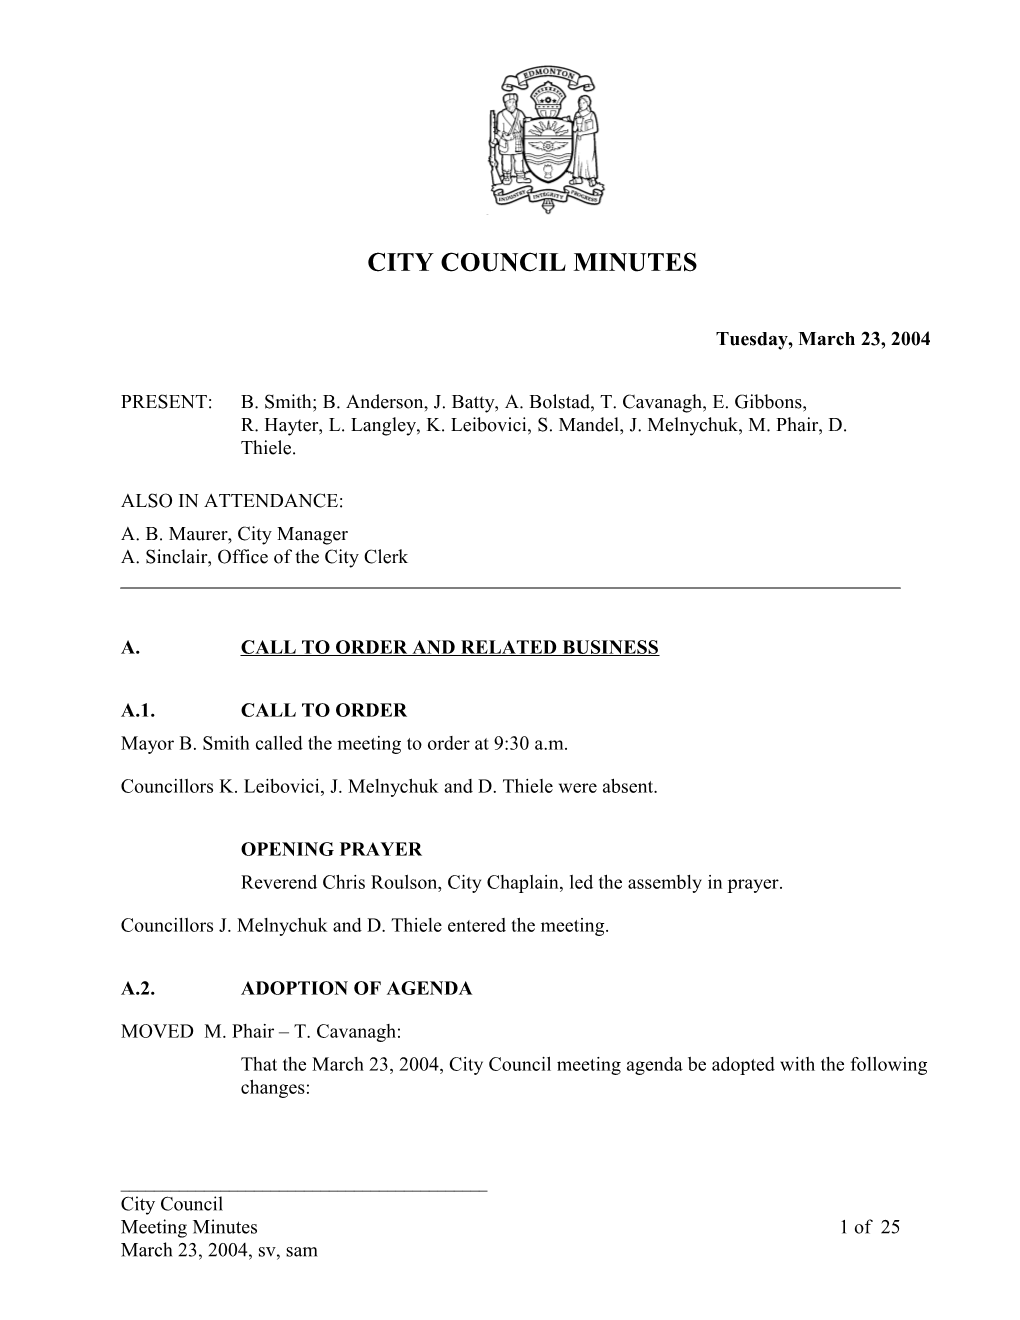 Minutes for City Council March 23, 2004 Meeting